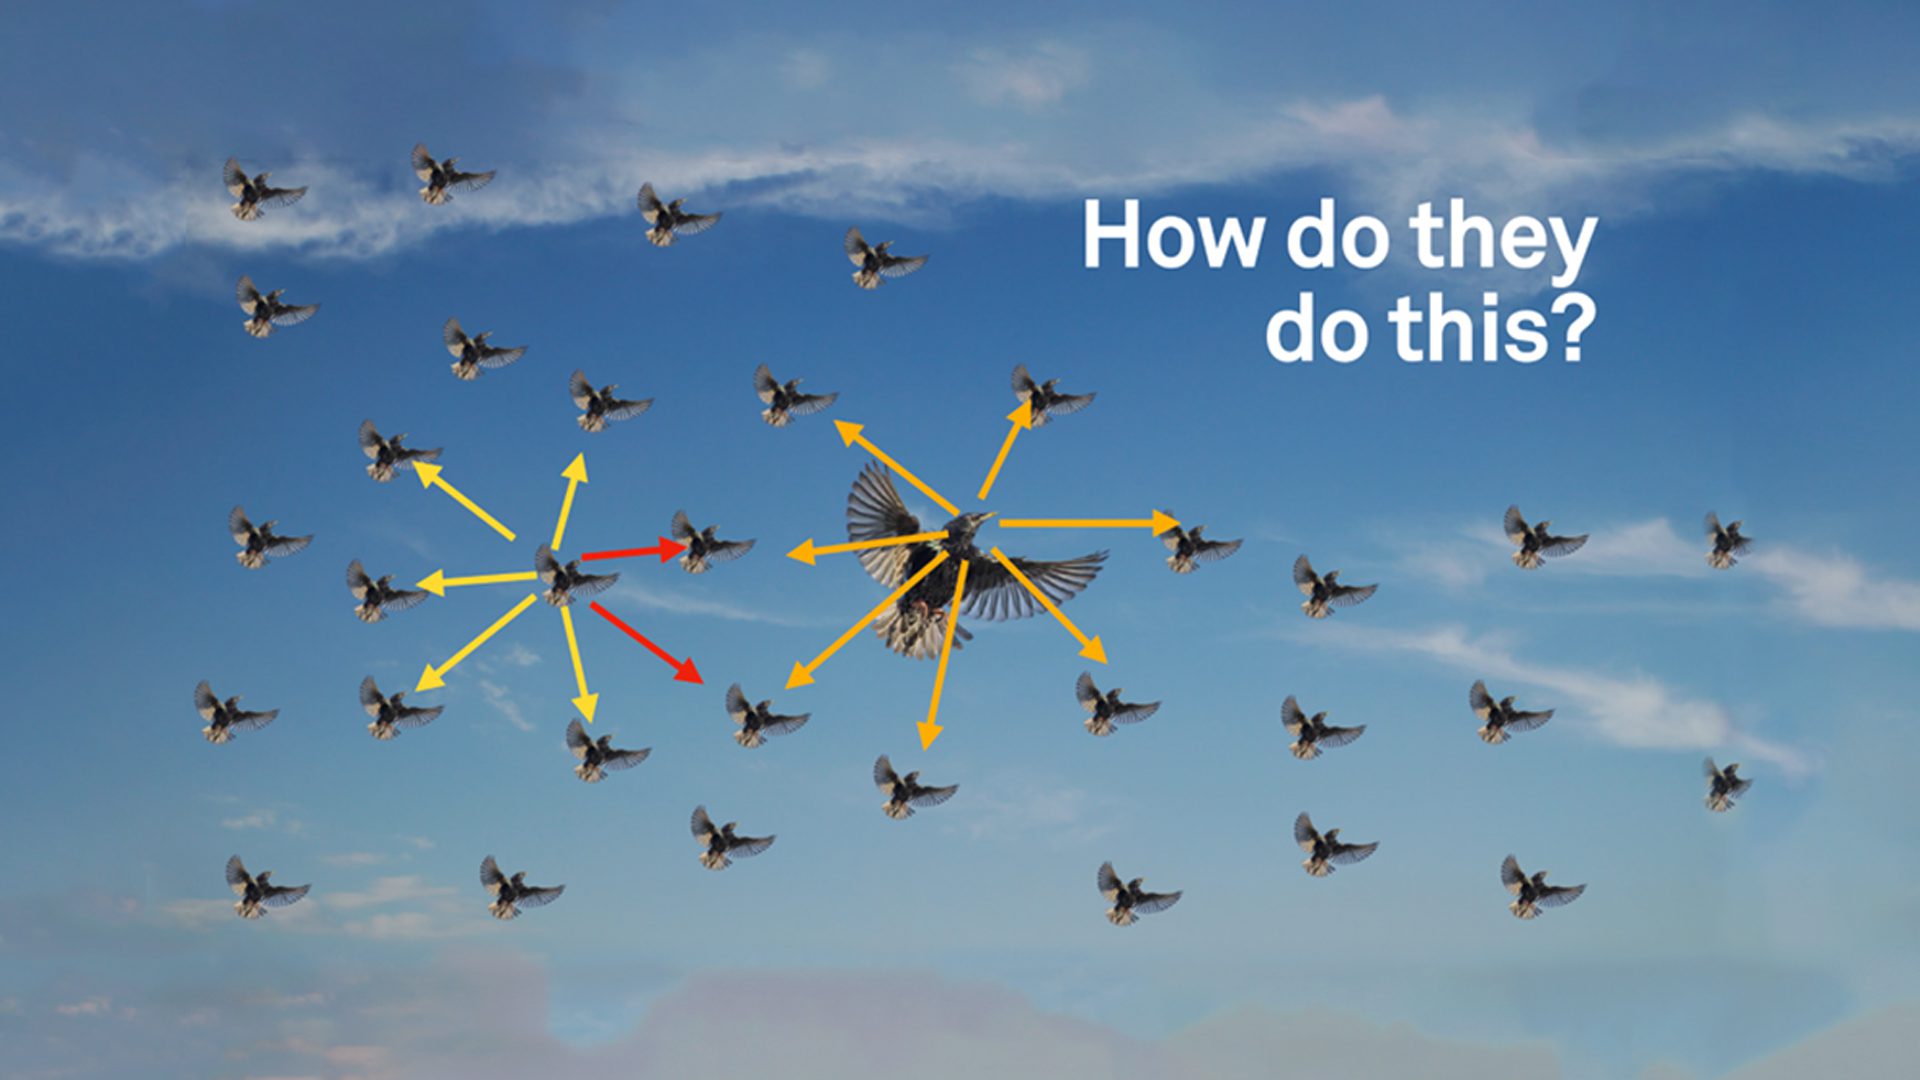 This image is a slide from Gerry Scullion's presentation, "Embracing the complexity mindset."

It is titled "How do they do this?" 

It shows a blue sky with a murmuration of starlings. Arrows have been drawn from some of the starlings to others. This is to illustrate that they interact with each other and cause a chain reaction throughout the group. 